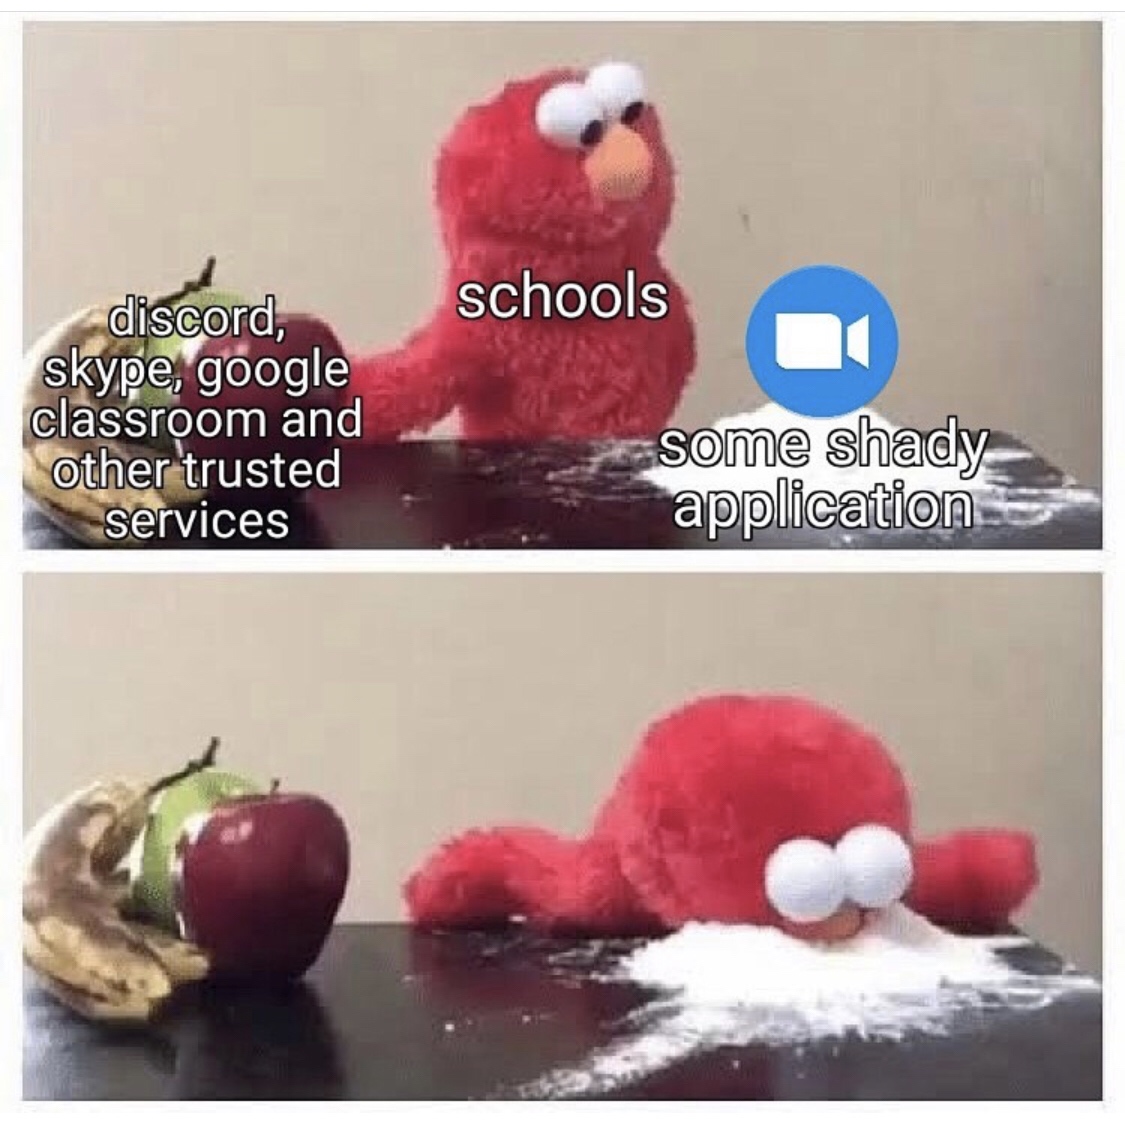 elmo cocaine meme - schools discord, skype, google classroom and other trusted services some shady applications